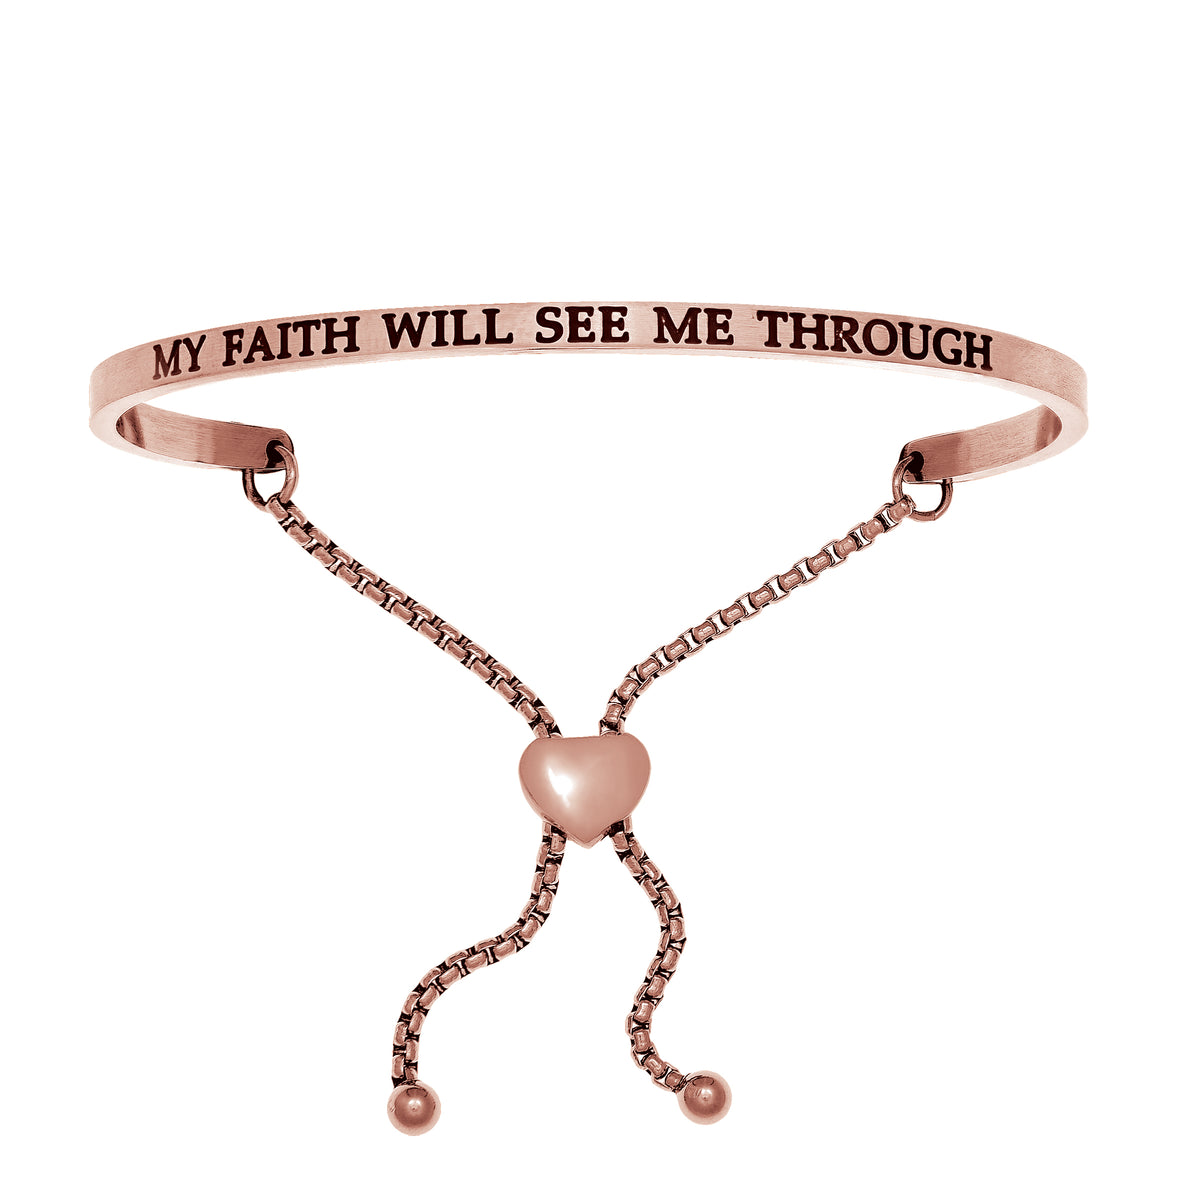 Intuitions Stainless Steel My Faith Will See Me Through Bangle Bracelet fine designer jewelry for men and women